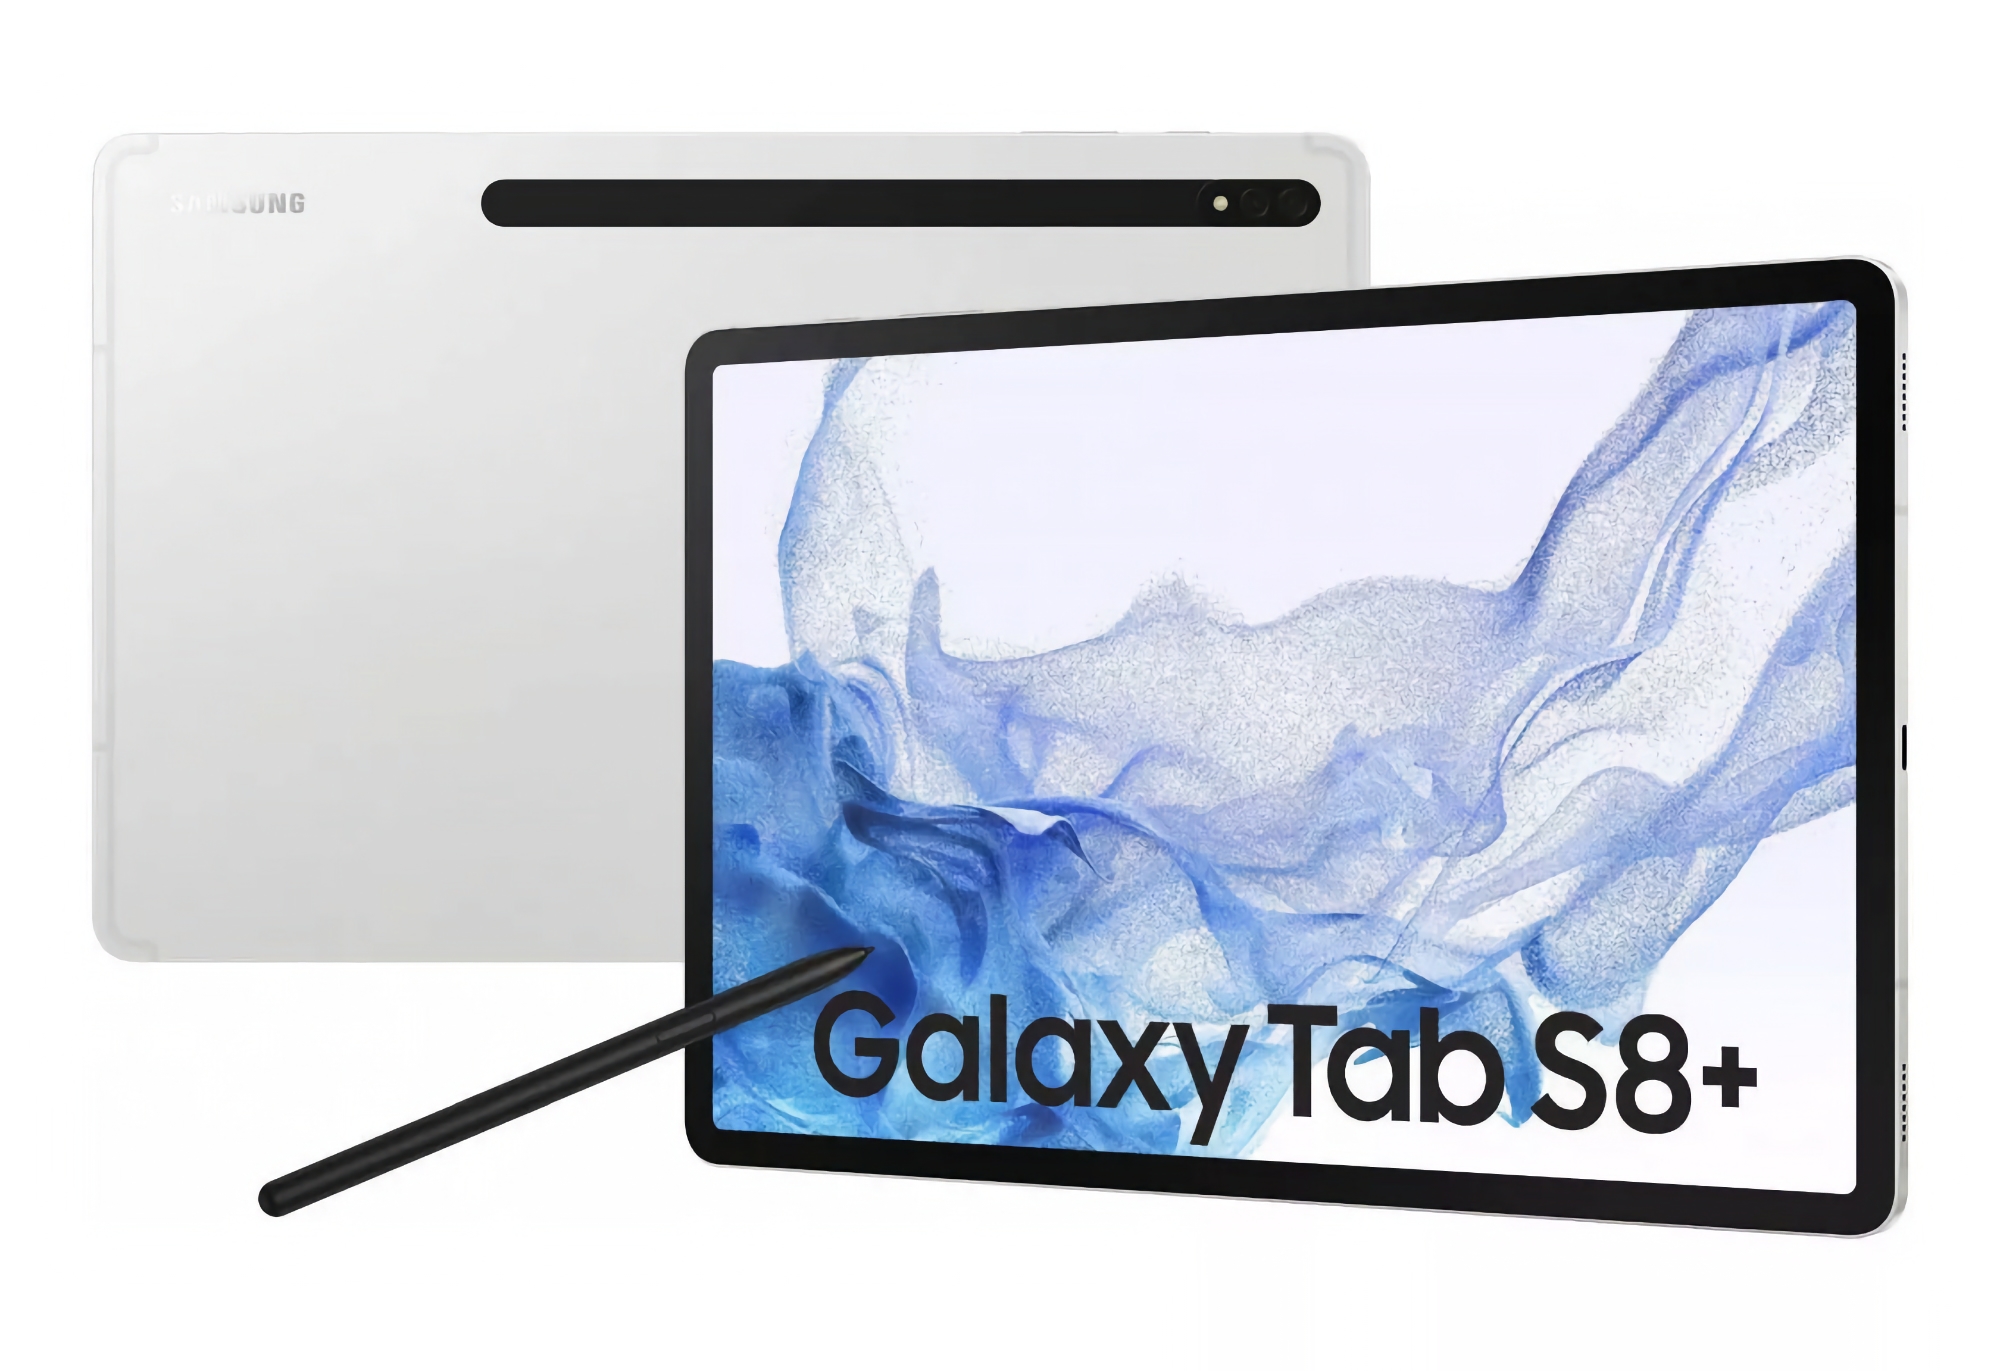 Samsung Galaxy Tab S8+ with Wi-Fi and 128GB storage can be bought